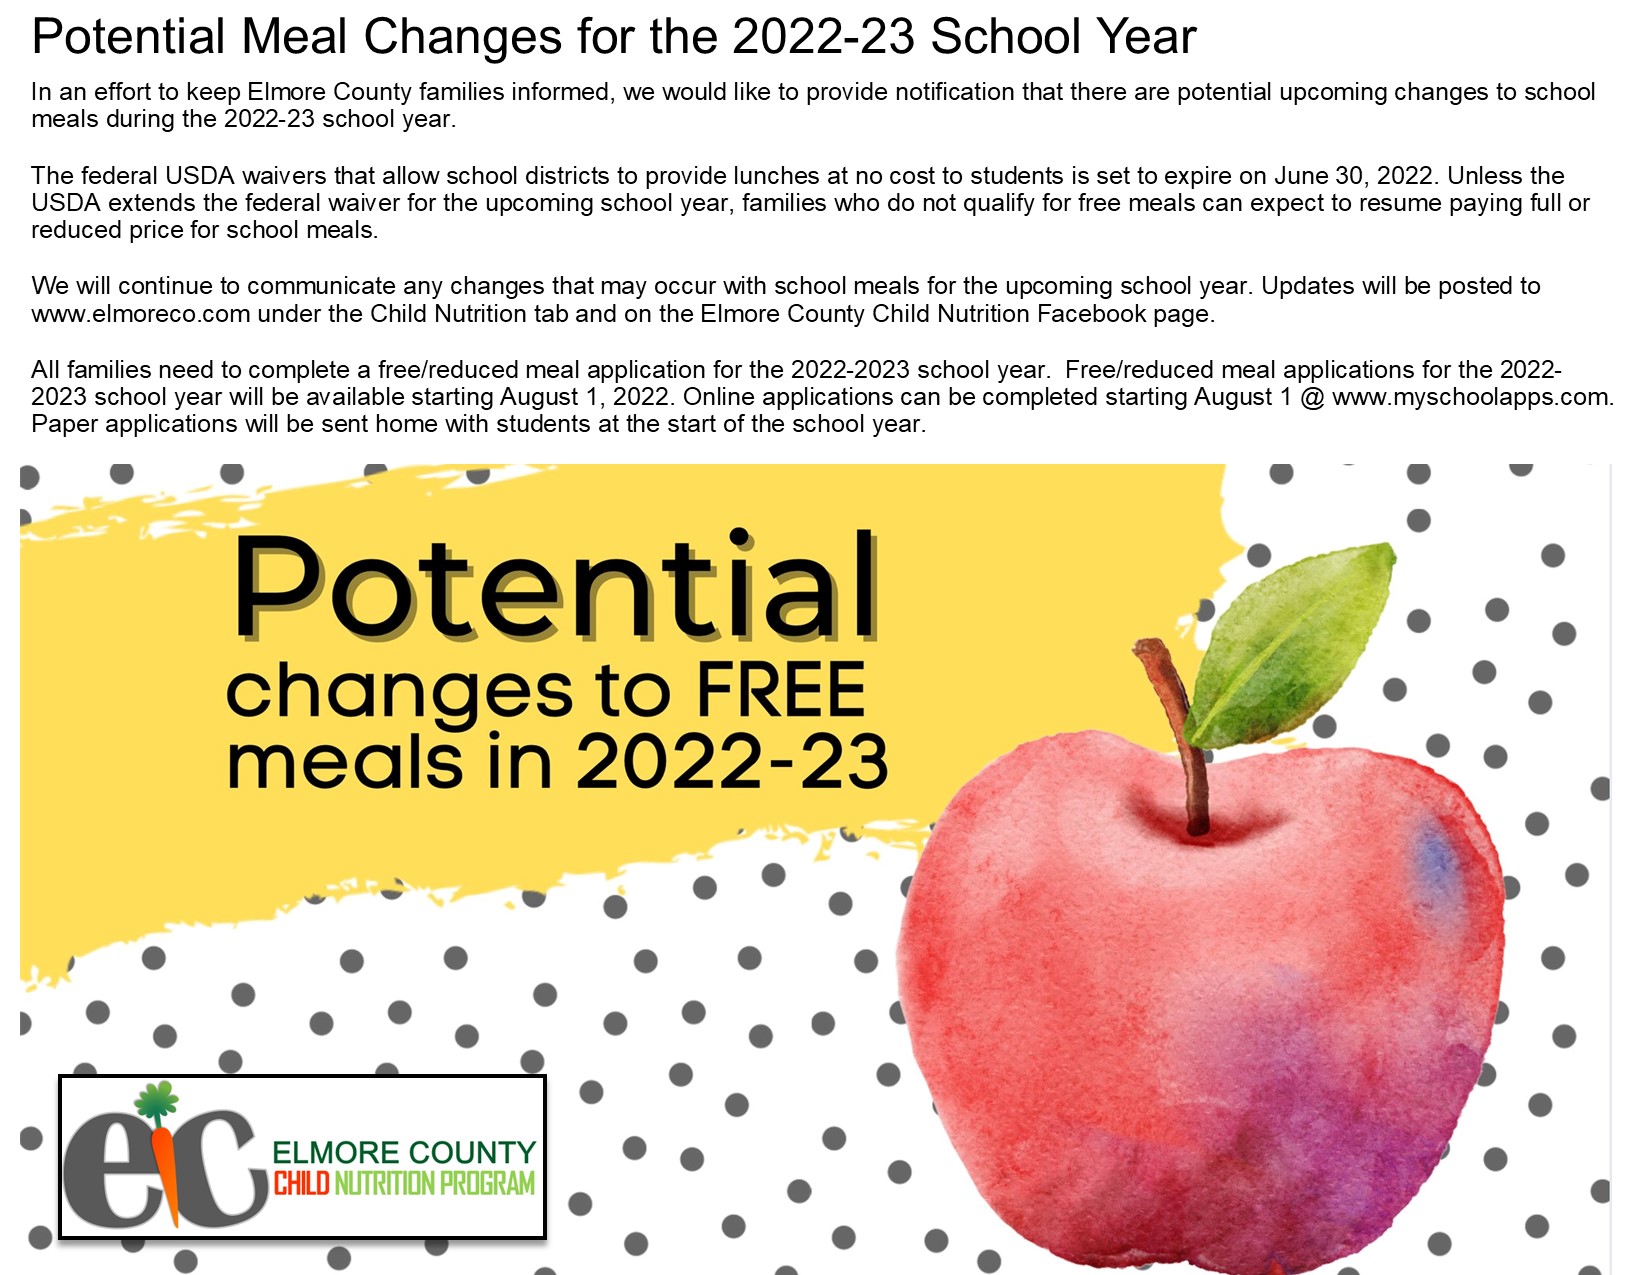 Potential Changes to Free Meals